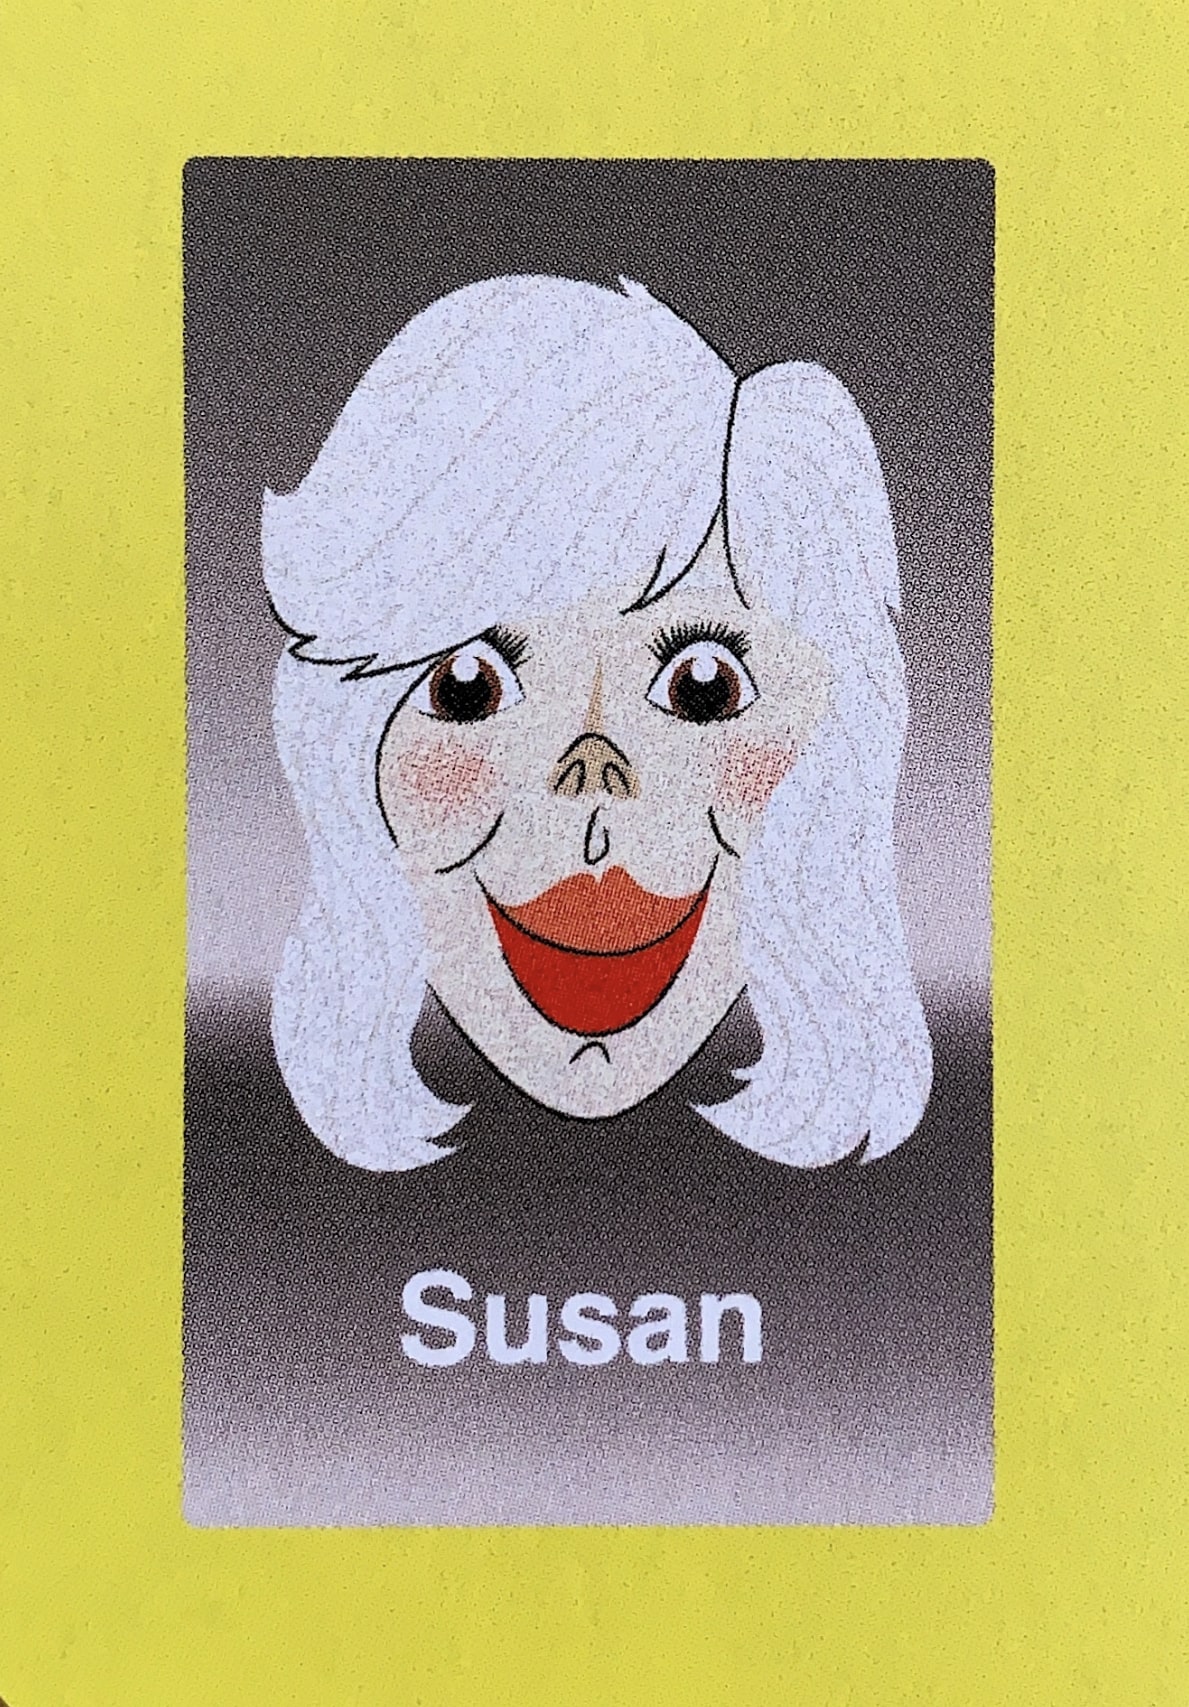  - Unbeknownst to the producers of the original Guess Who?®, Susan began life as a Sherman, before transitioning to a woman in her mid-20s. The 1970s were a less accepting time for transgendered individuals, so Susan kept it quiet. The secret eventually leaked to the Guess Who?® public in the ’80s, and thankfully, the news was met with widespread warmth and understanding. The only backlash was with regards to how the information would change the actual Guess Who?® gameplay; education began in ernest, playing no small part in beginning to educate the American public on how to properly inquire about gender and identity.